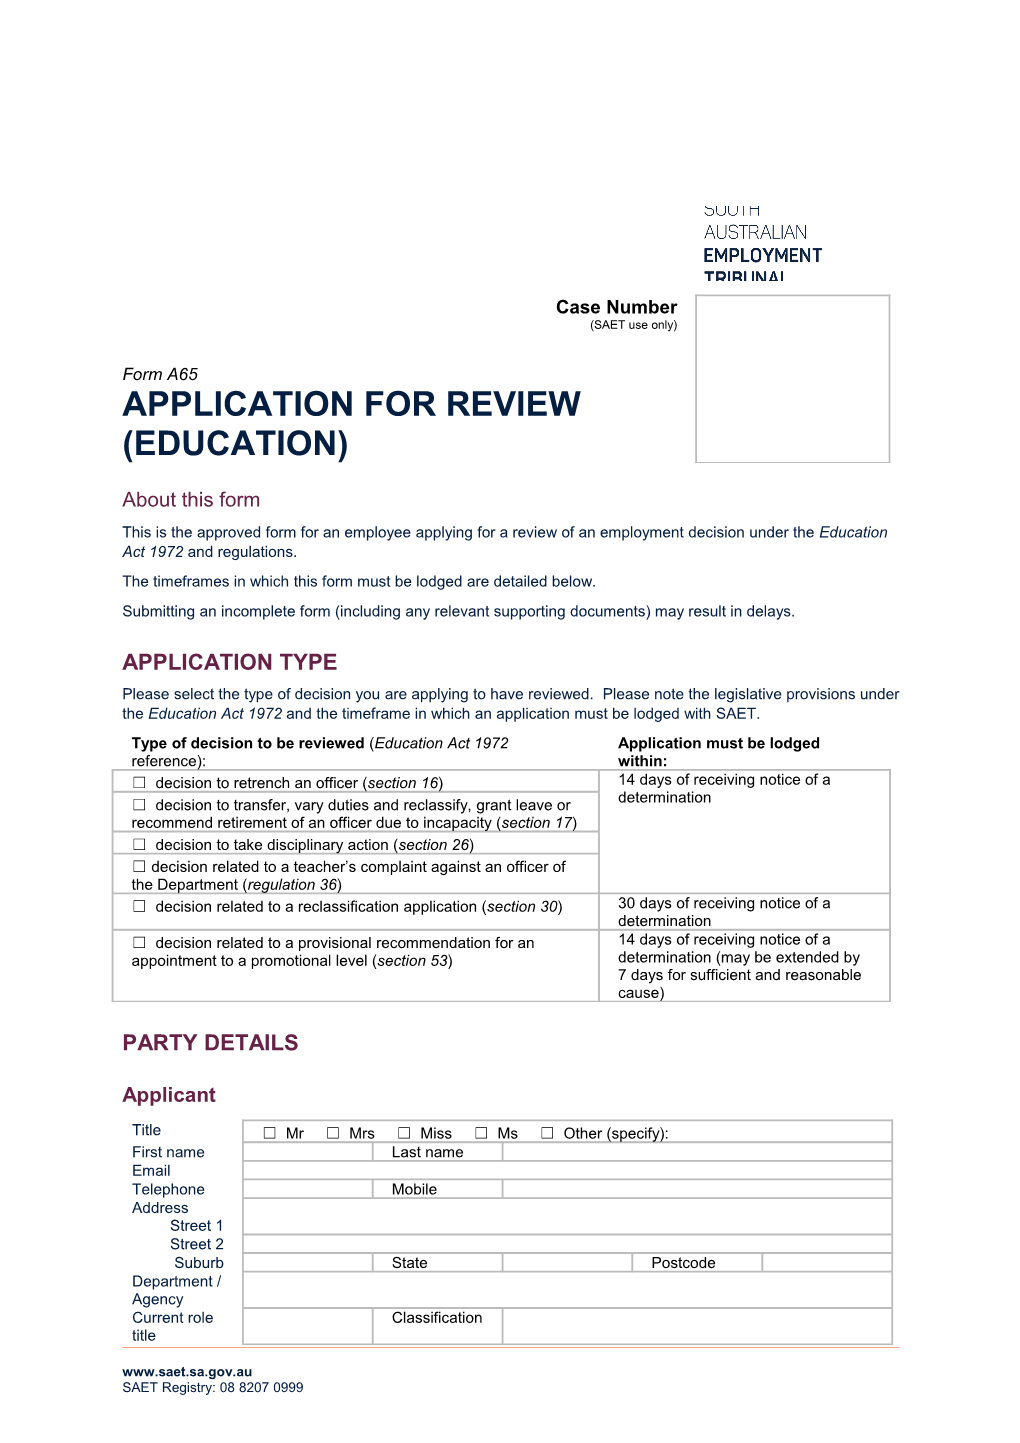 Application for Review (Education)